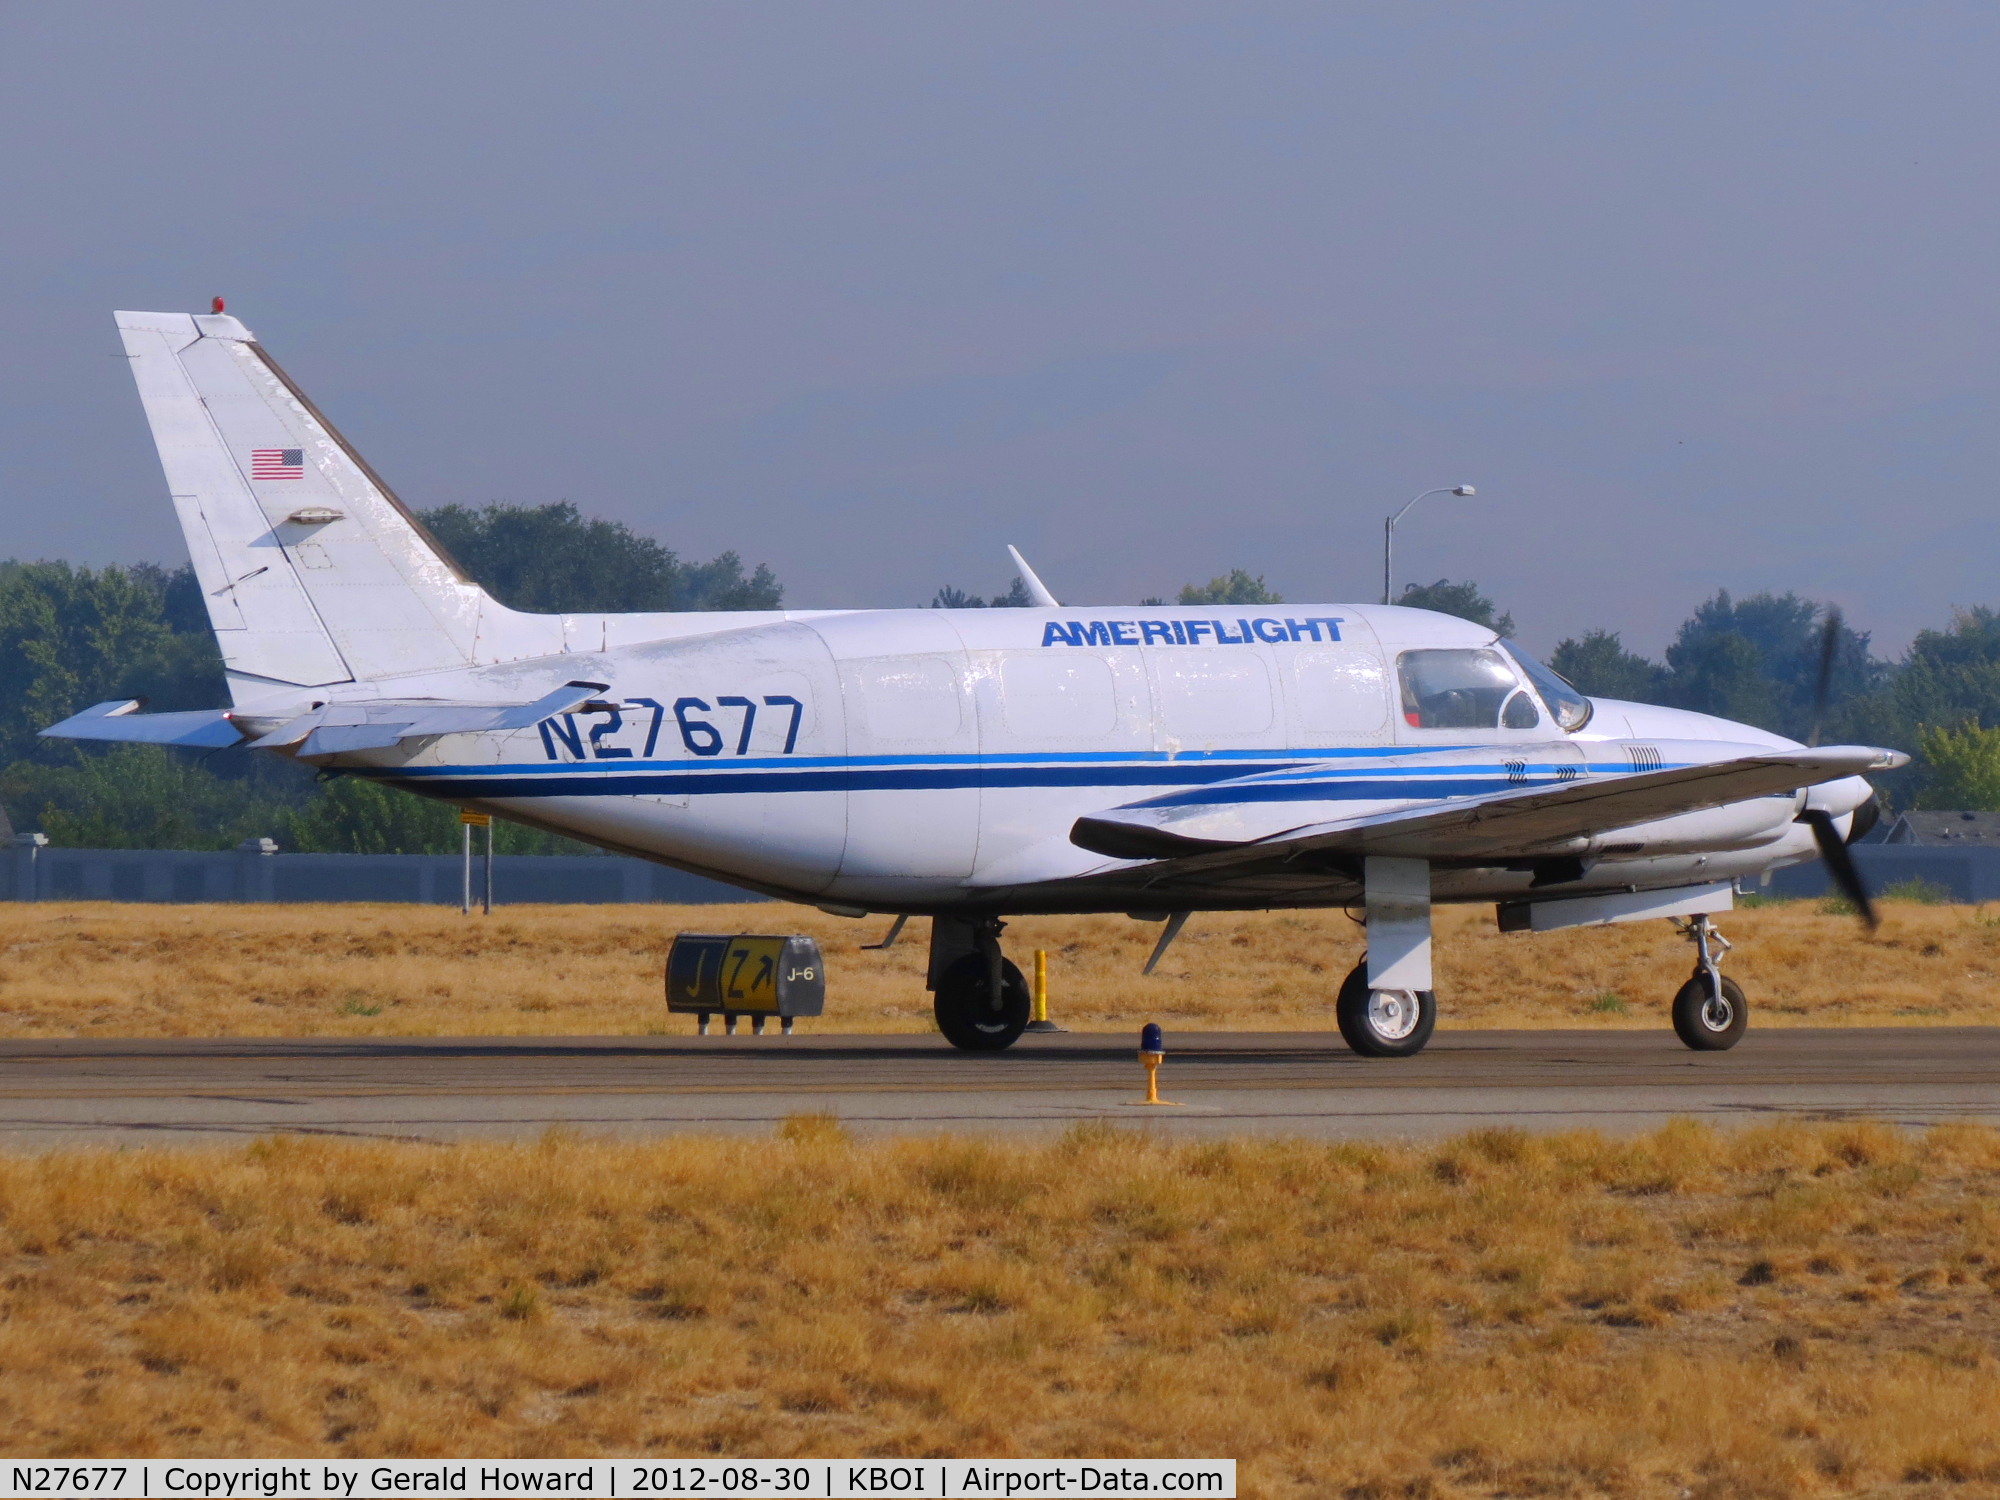 N27677, 1978 Piper PA-31-350 Chieftain C/N 31-7852101, Taxing to RWY 10L.